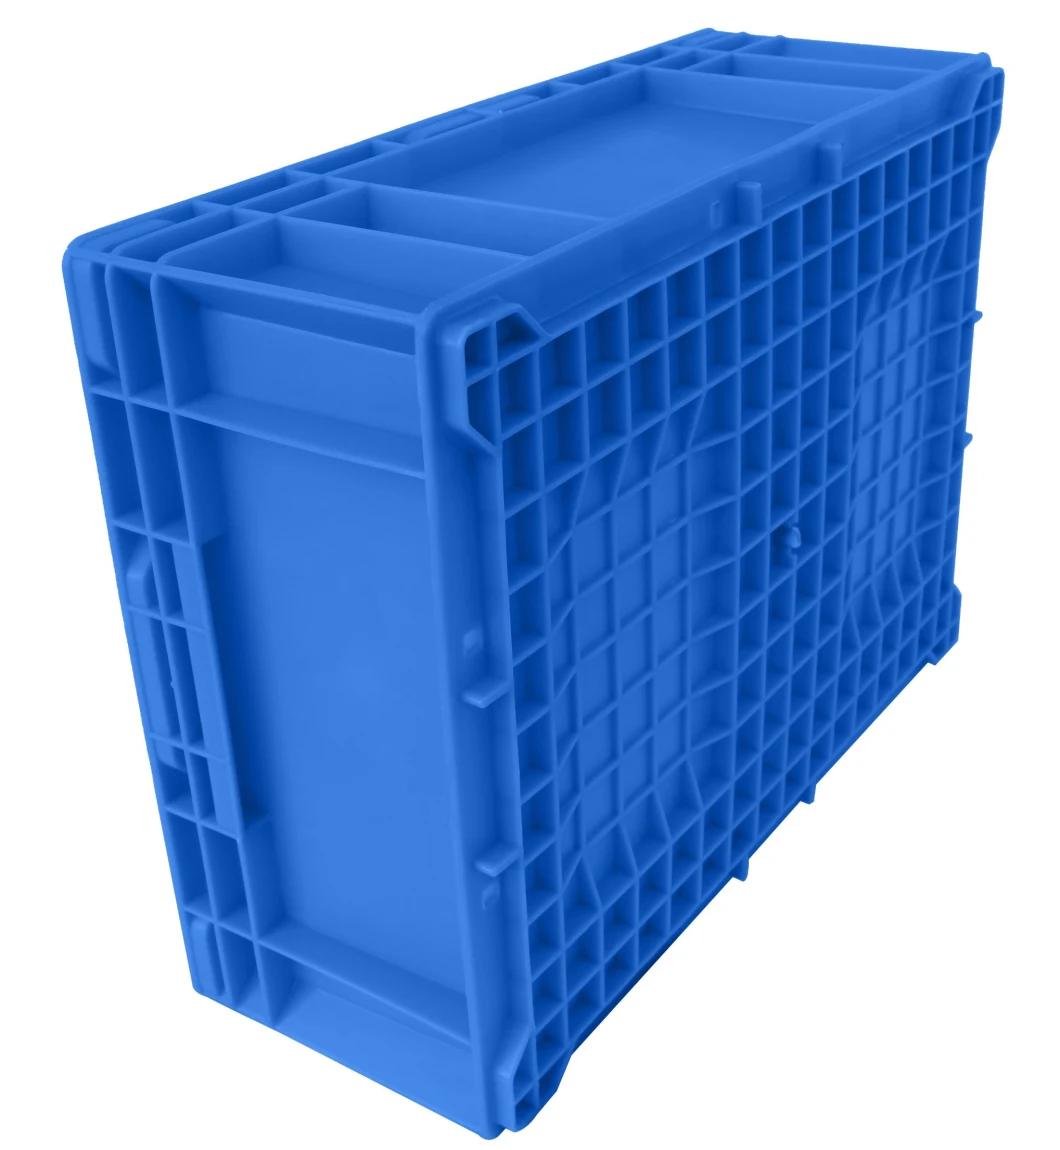 HP4b Hot Sale HDPE Material Cheap Price Recycle Heavy Duty HP Crate Plastic PP Box for Auto Parts High Quality 100% Virgin PP Plastic Recycle Storage Box